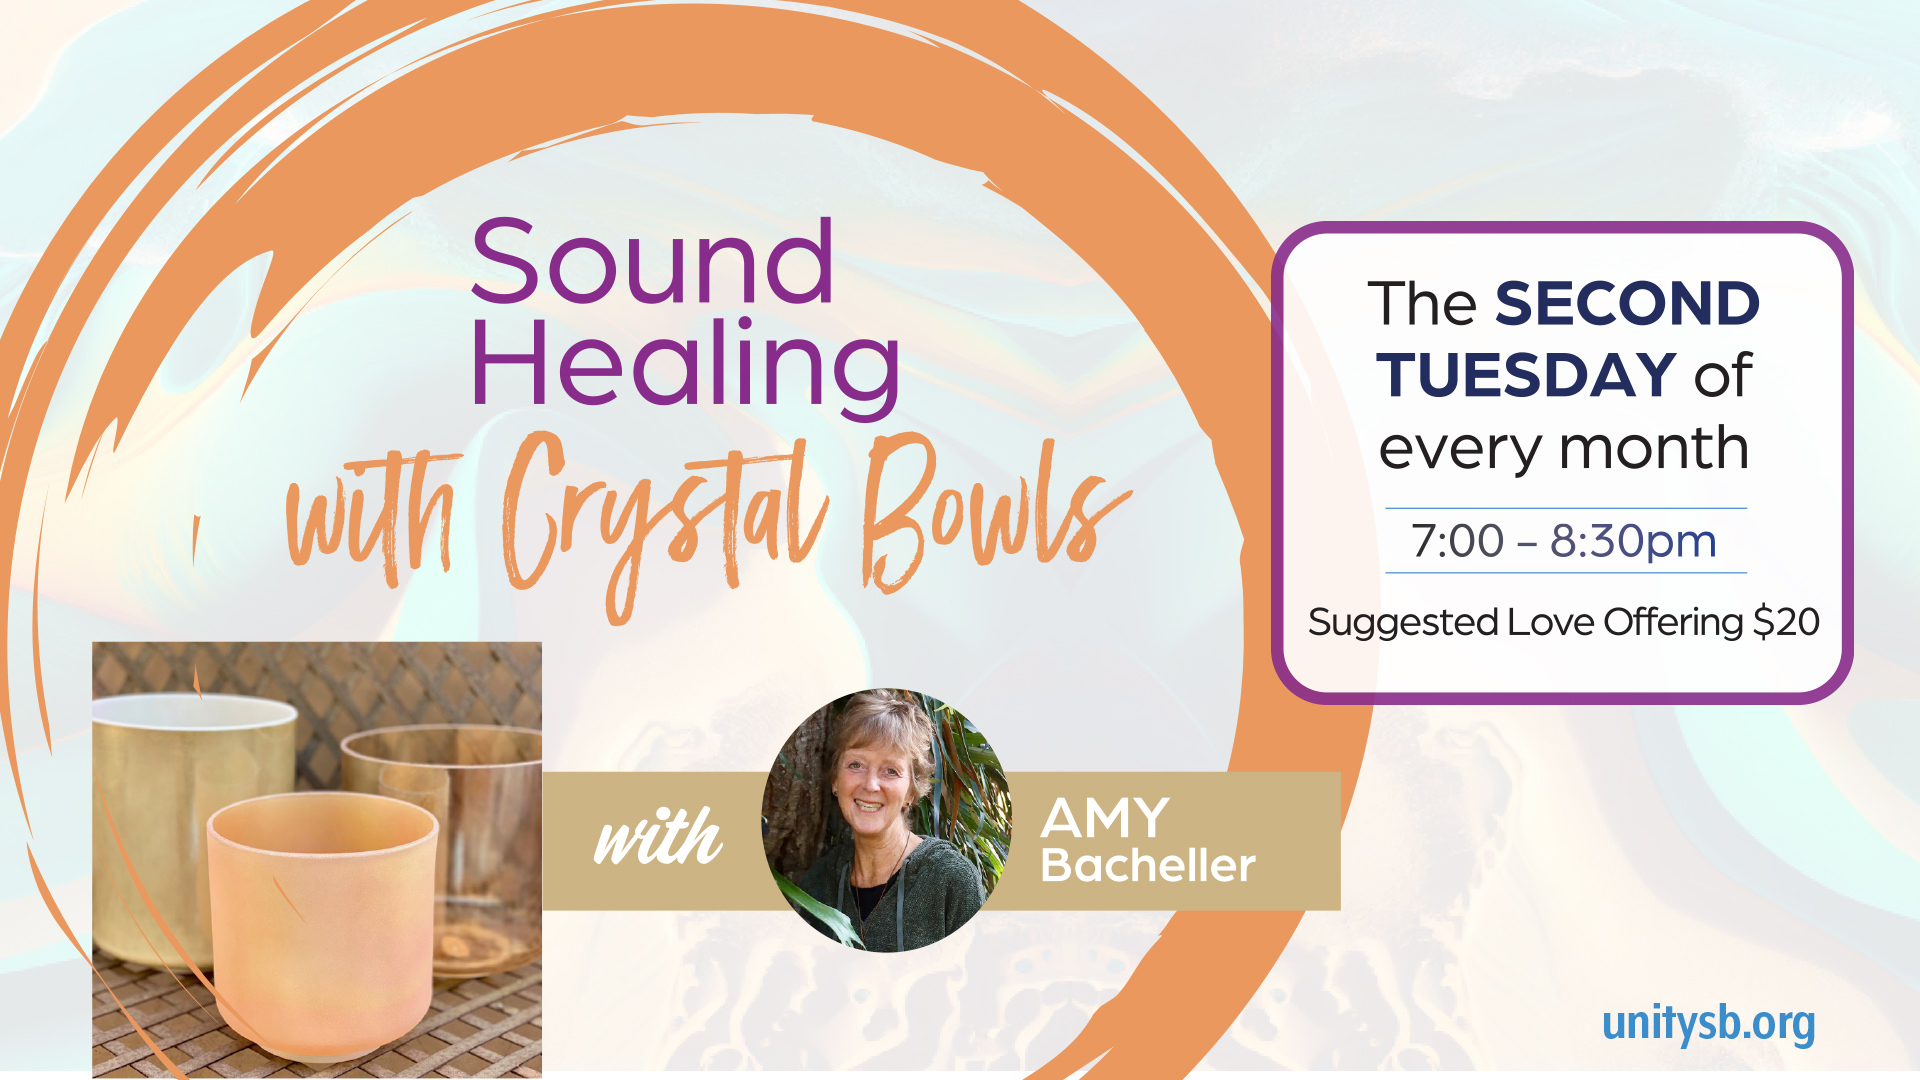 Sound Healing with Crystal Bowls – rescheduled